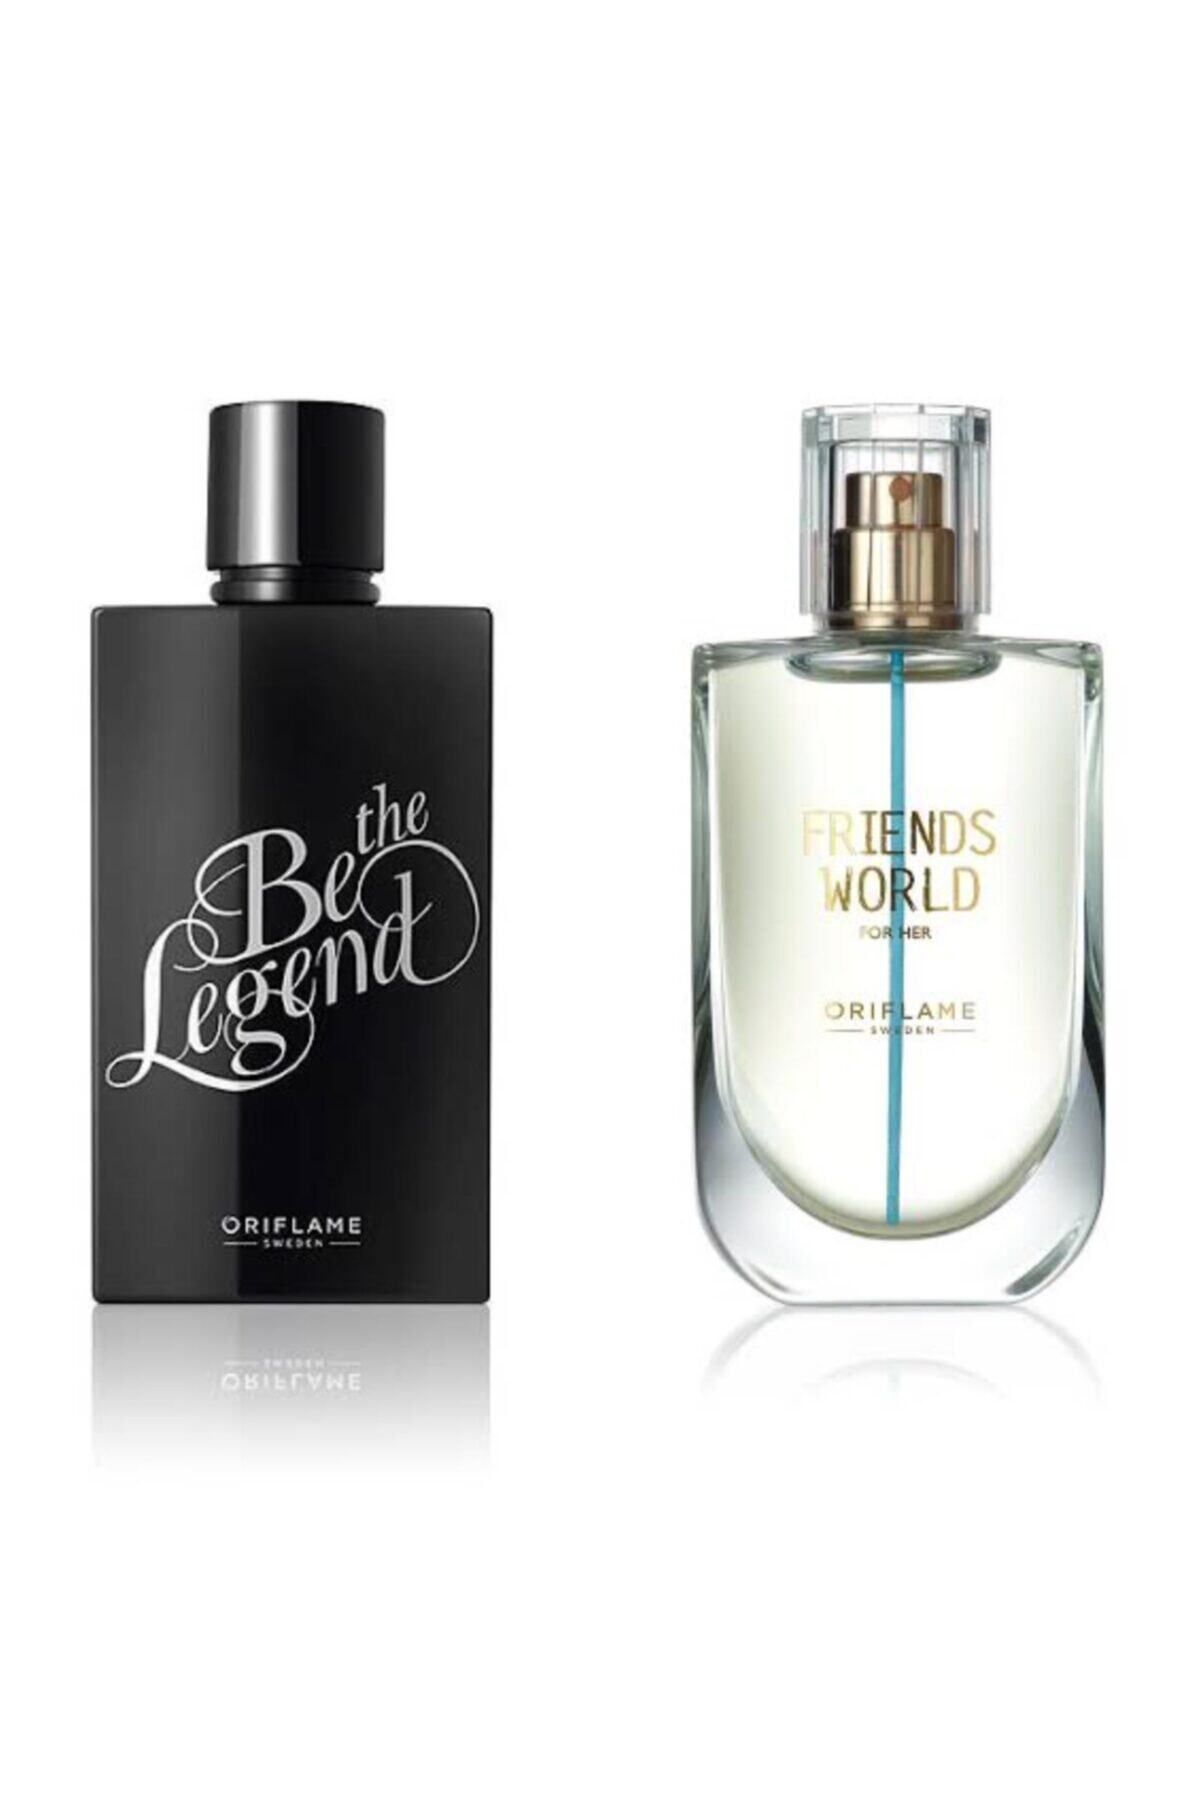 Oriflame Be The Legend Edt & Friends World For Her Edt